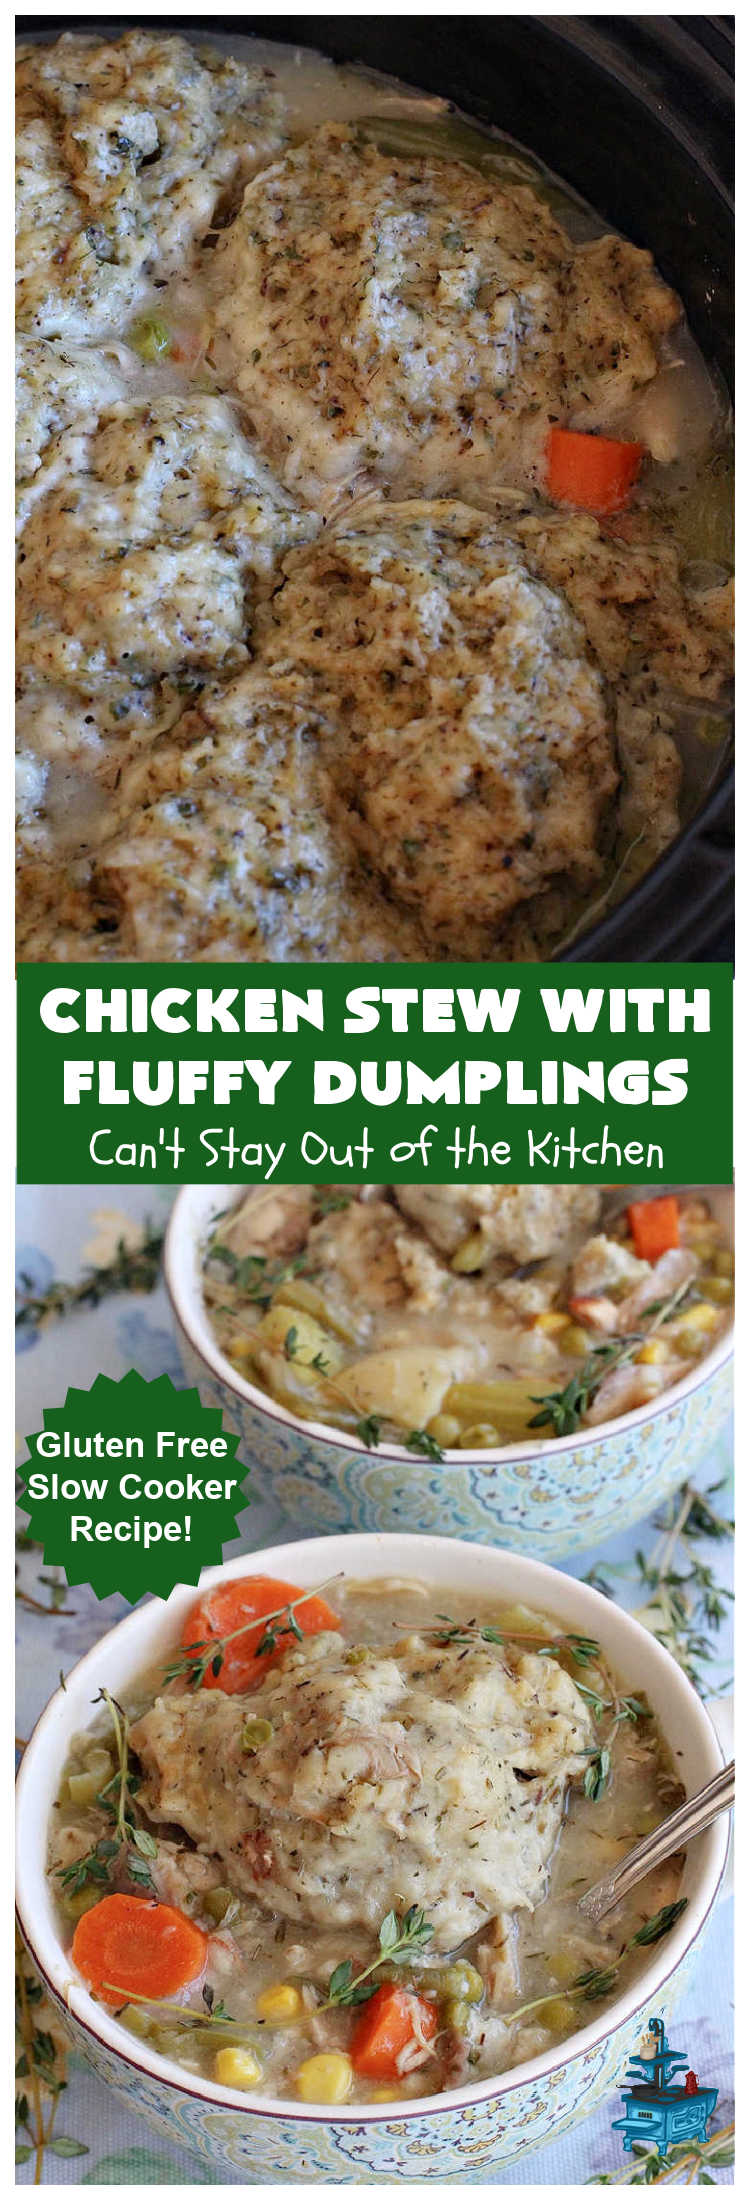 Chicken Stew With Fluffy Dumplings | Can't Stay Out of the Kitchen | this heartening #OneDishMeal is so comforting & rewarding. The #FluffyDumplings are light & airy rather than dense & heavy. They're seasoned with plenty of herbs to make them flavorful instead of being plain & tasteless. The comfort food #recipe  is excellent for family or company dinners & it's easier than many entrees since it's made in the #crockpot. We receive rave reviews every time we serve this excellent #entree. #chicken #ChickenStew #peas #dumplings #corn #GreenBeans #carrots #GlutenFree #ChickenStewWithFluffyDumplings